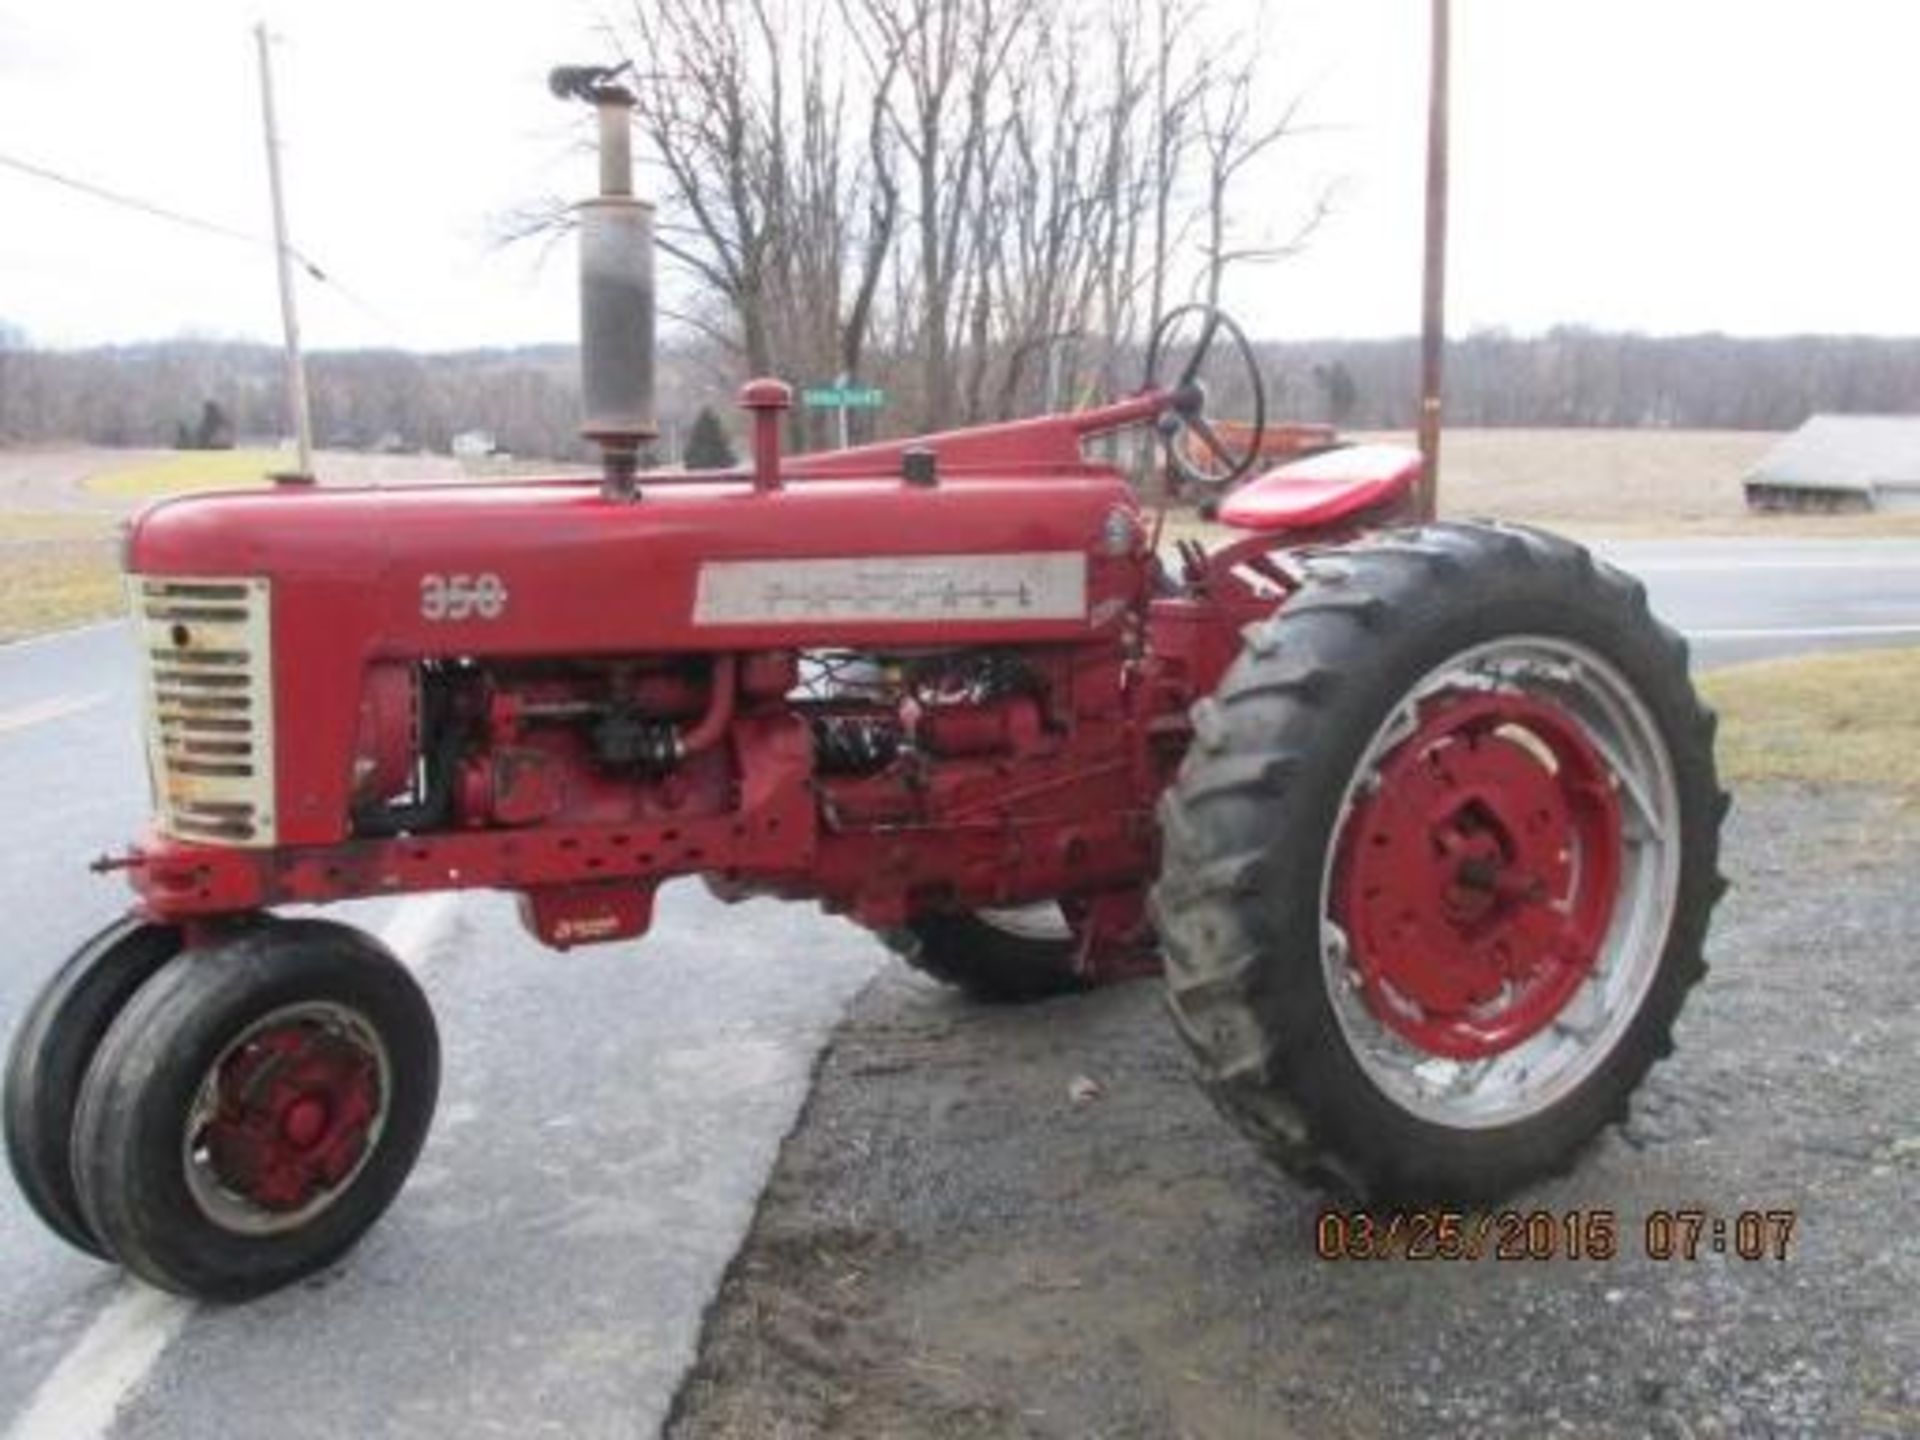 Farmall 350 S#512, 12th of the 350's built